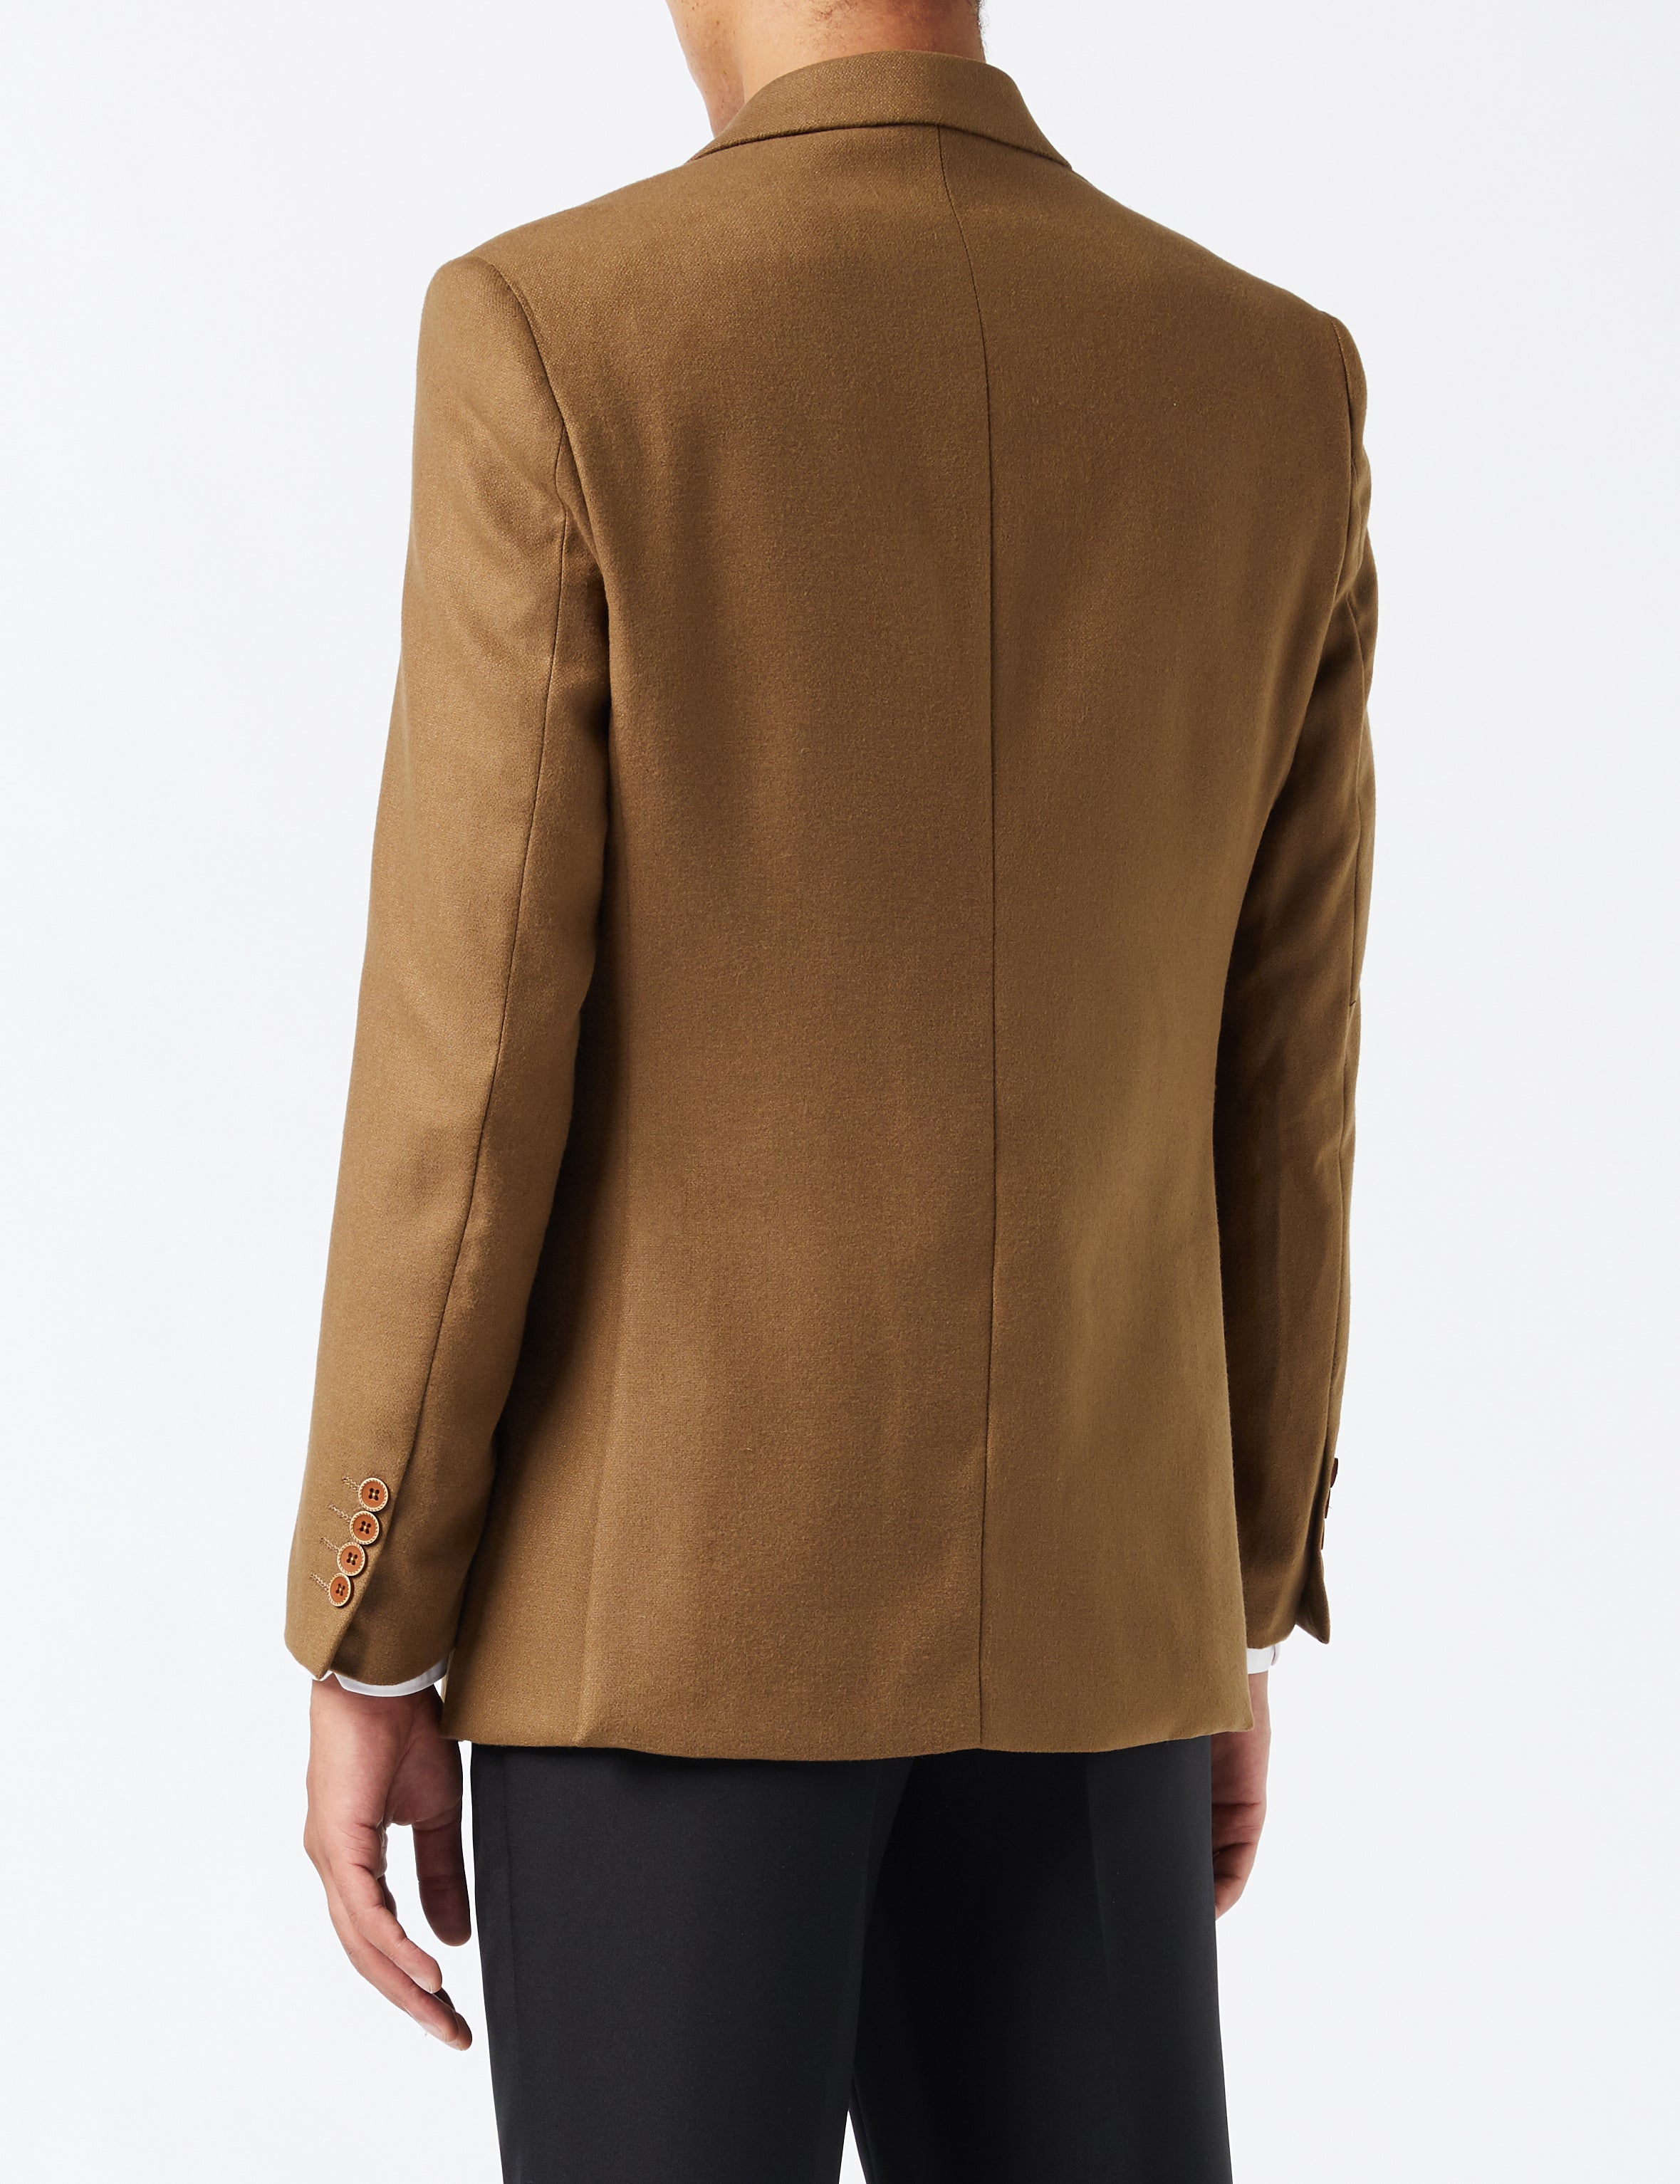 MARCO-DOUBLE BREASTED TWEED TAN JACKET